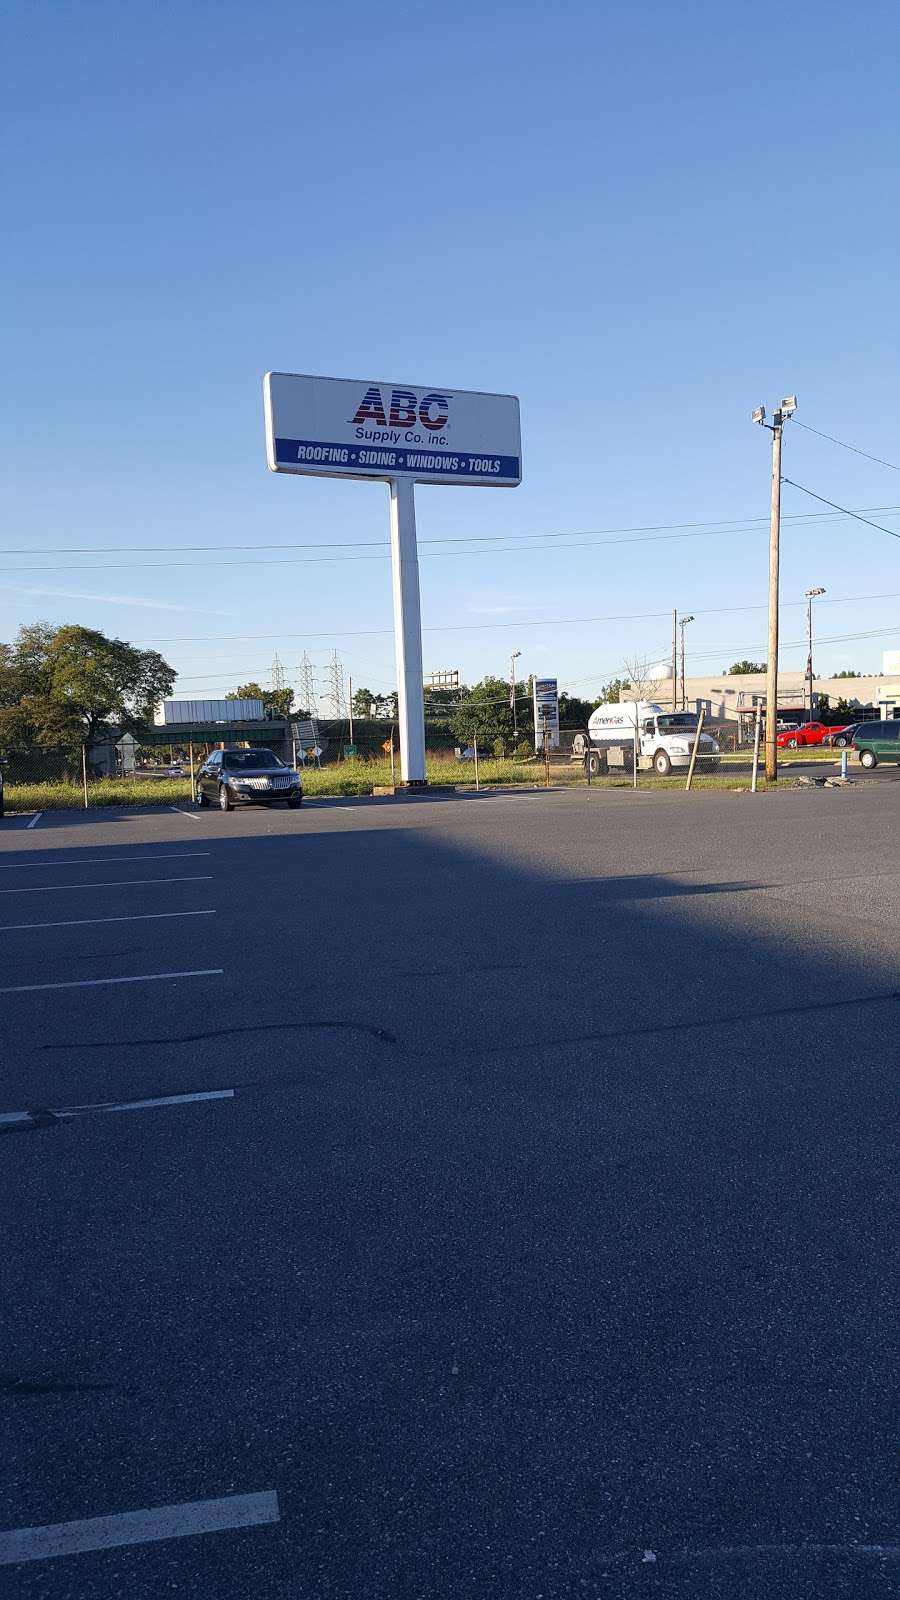 ABC Supply Co., Inc. | 2591 Centre Ave, Reading, PA 19605 | Phone: (610) 921-9600